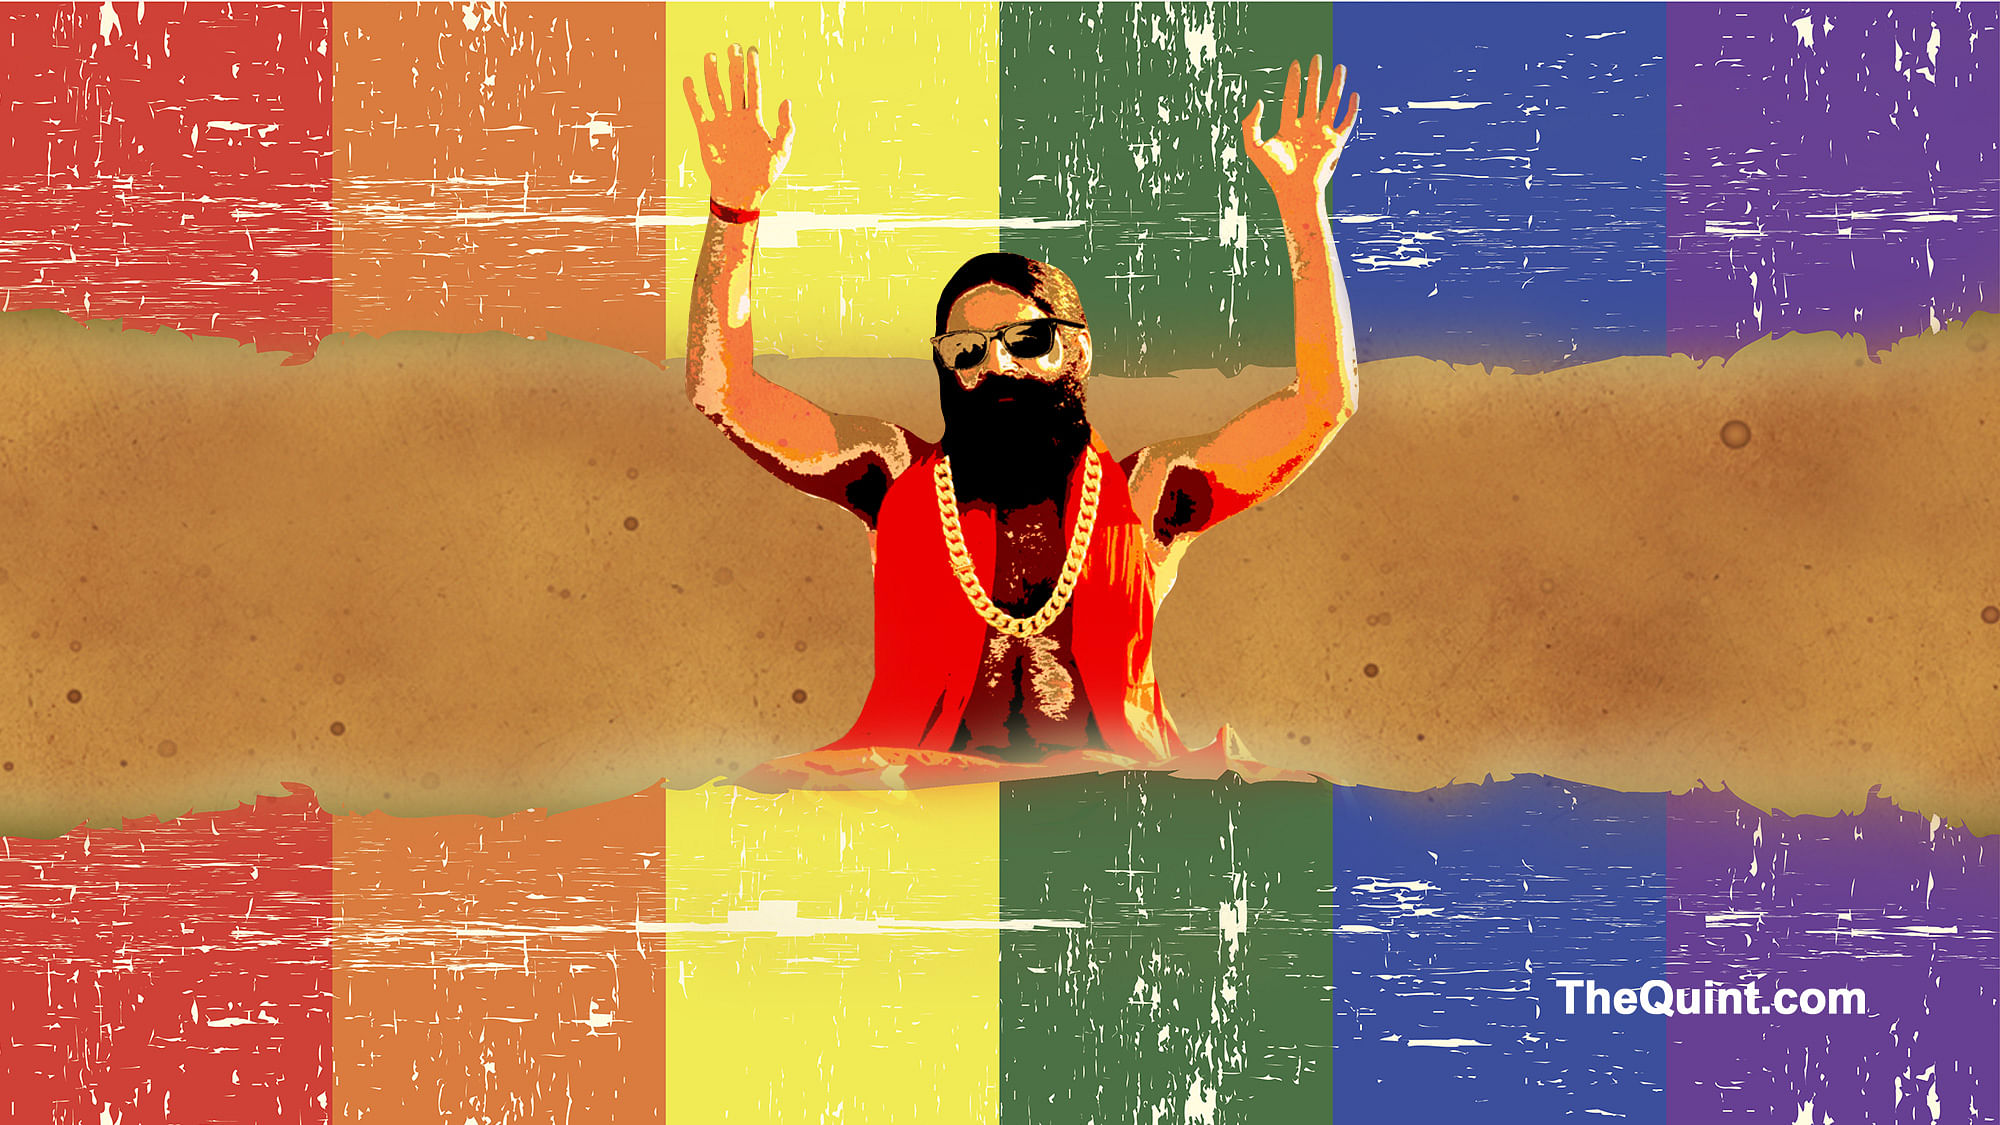 Calling homosexuality a mental disorder, Baba Ramdev has claimed that it can cured by through Yoga. (Photo: <b>The Quint</b>)